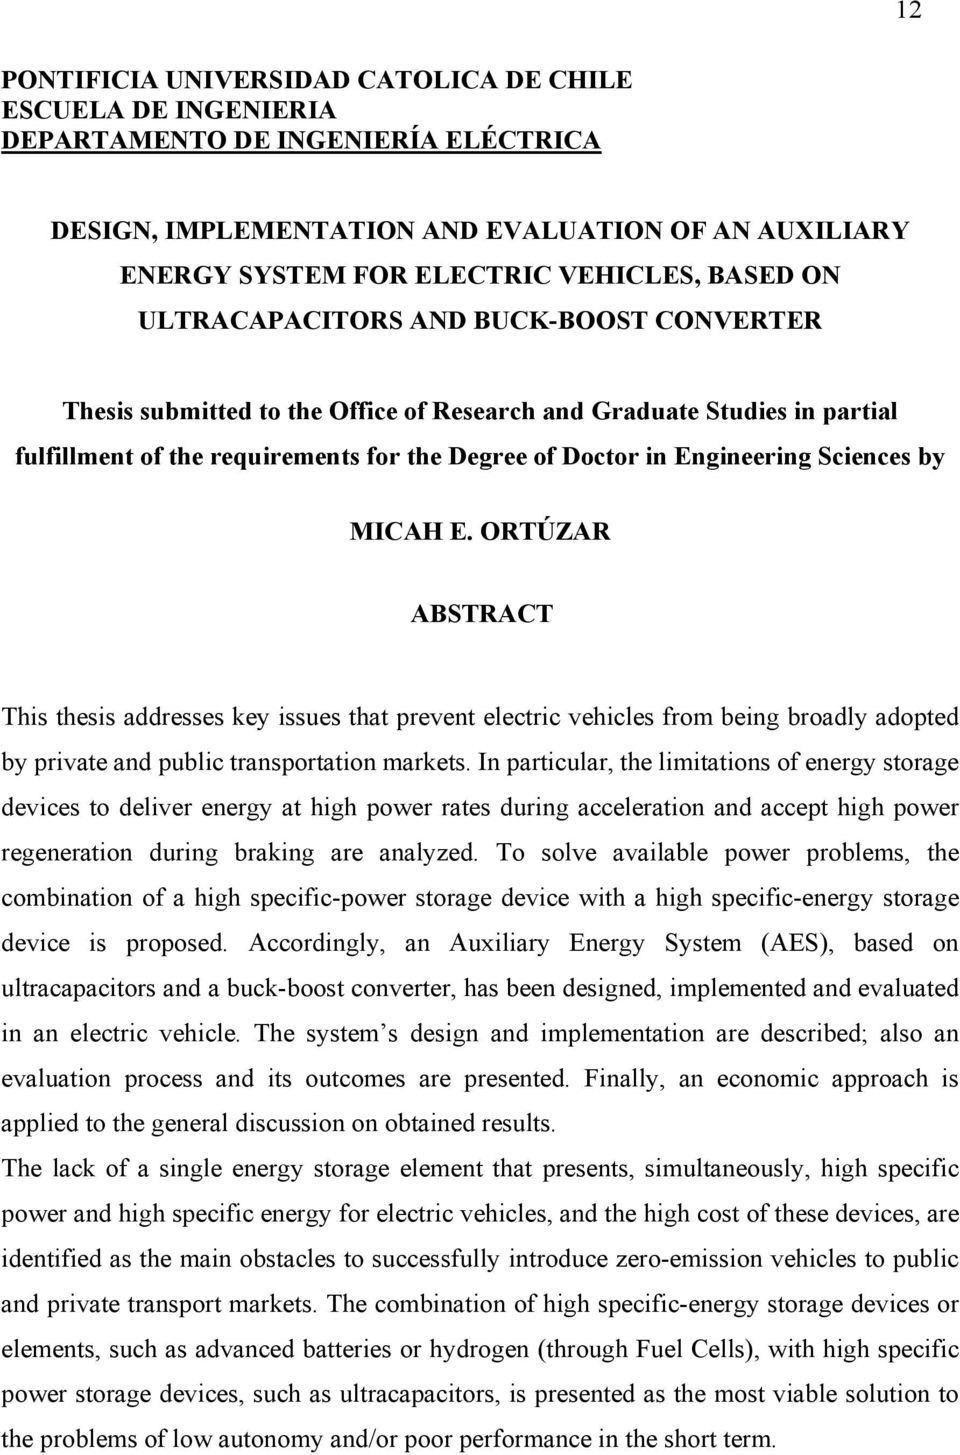 by MICAH E. ORTÚZAR ABSTRACT This thesis addresses key issues that prevent electric vehicles from being broadly adopted by private and public transportation markets.